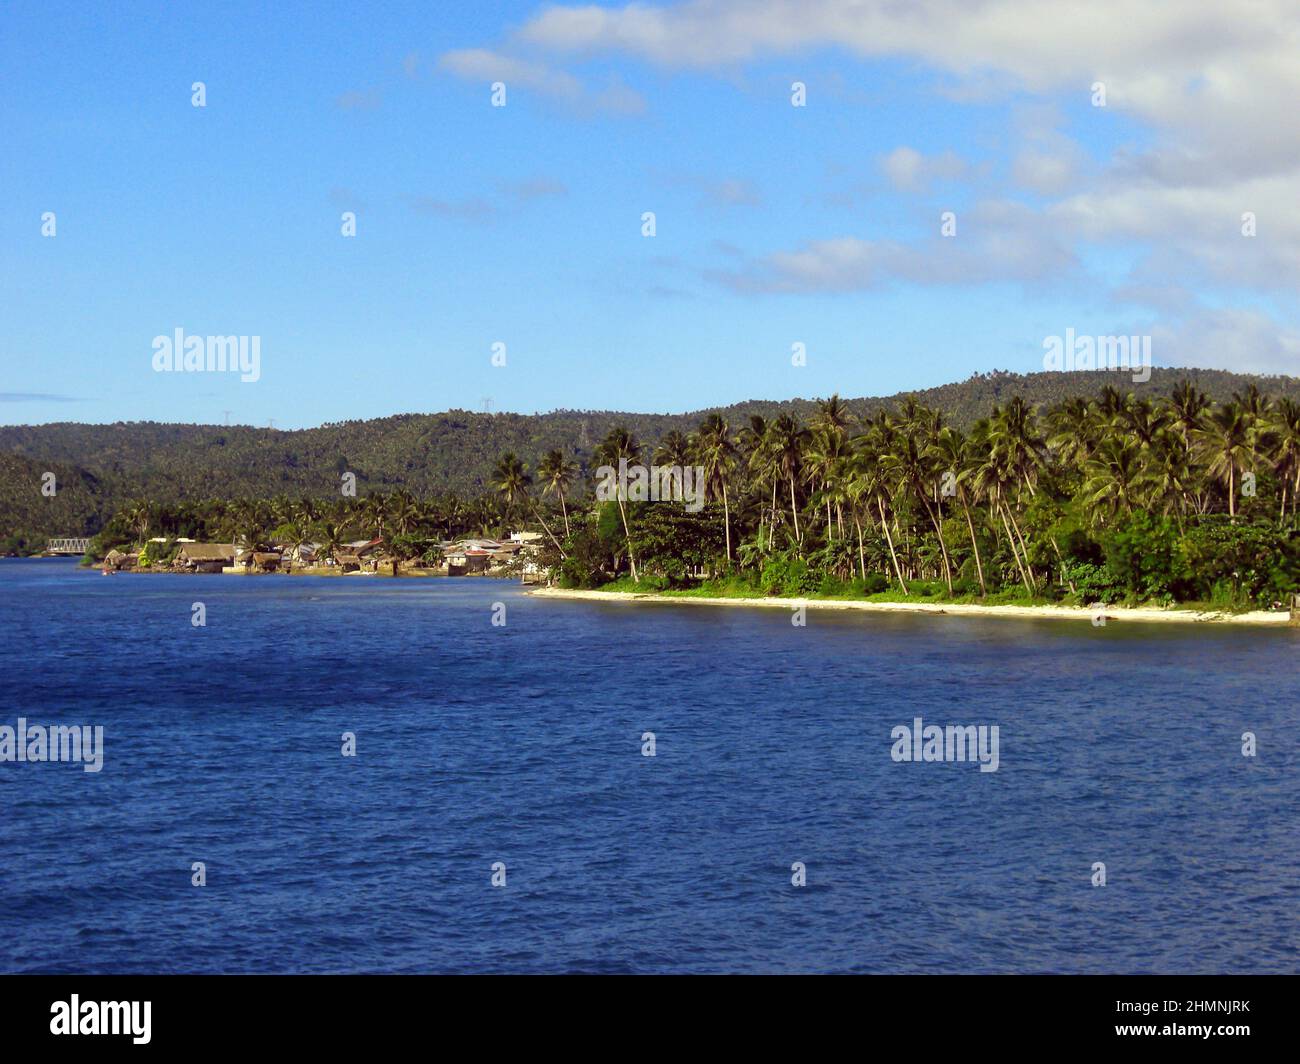 View over the island Samar on the Philippines January 22, 2012 Stock Photo